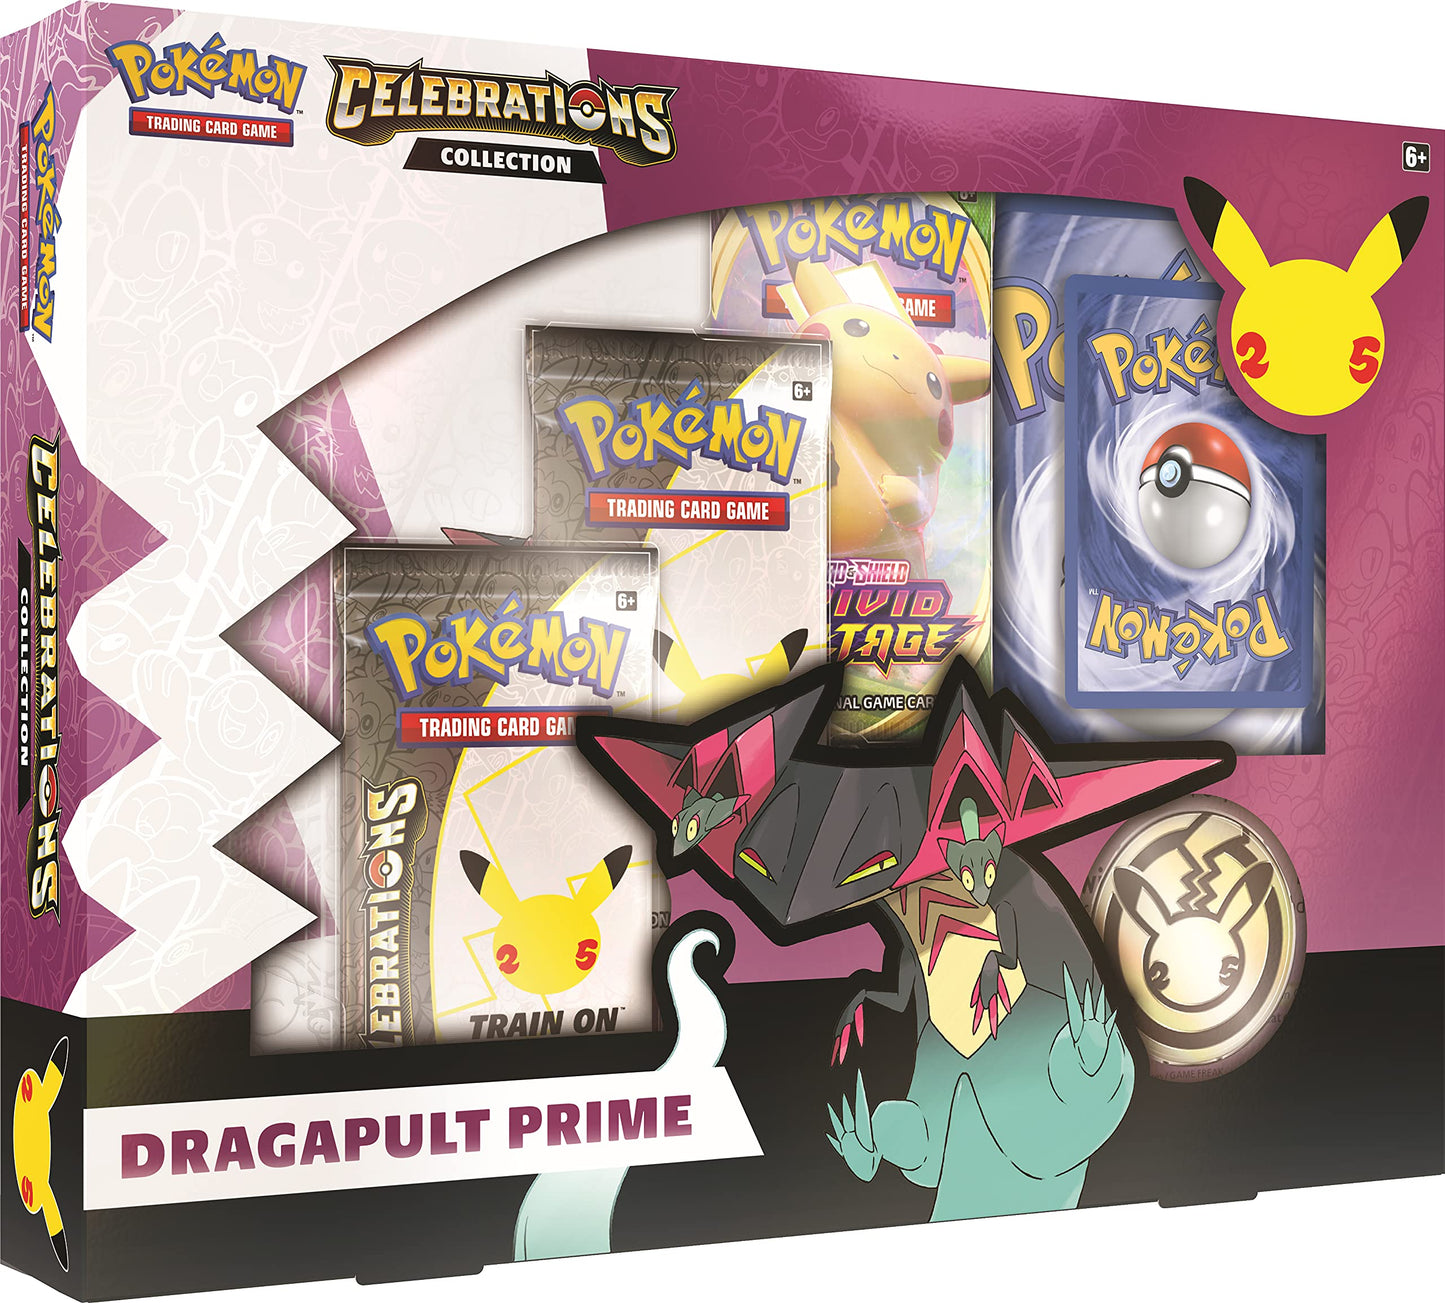 Pokemon | Celebrations Collection Dragapult Prime | Card Game | Ages 6+ | 2 Players | 10+ Minutes Playing Time